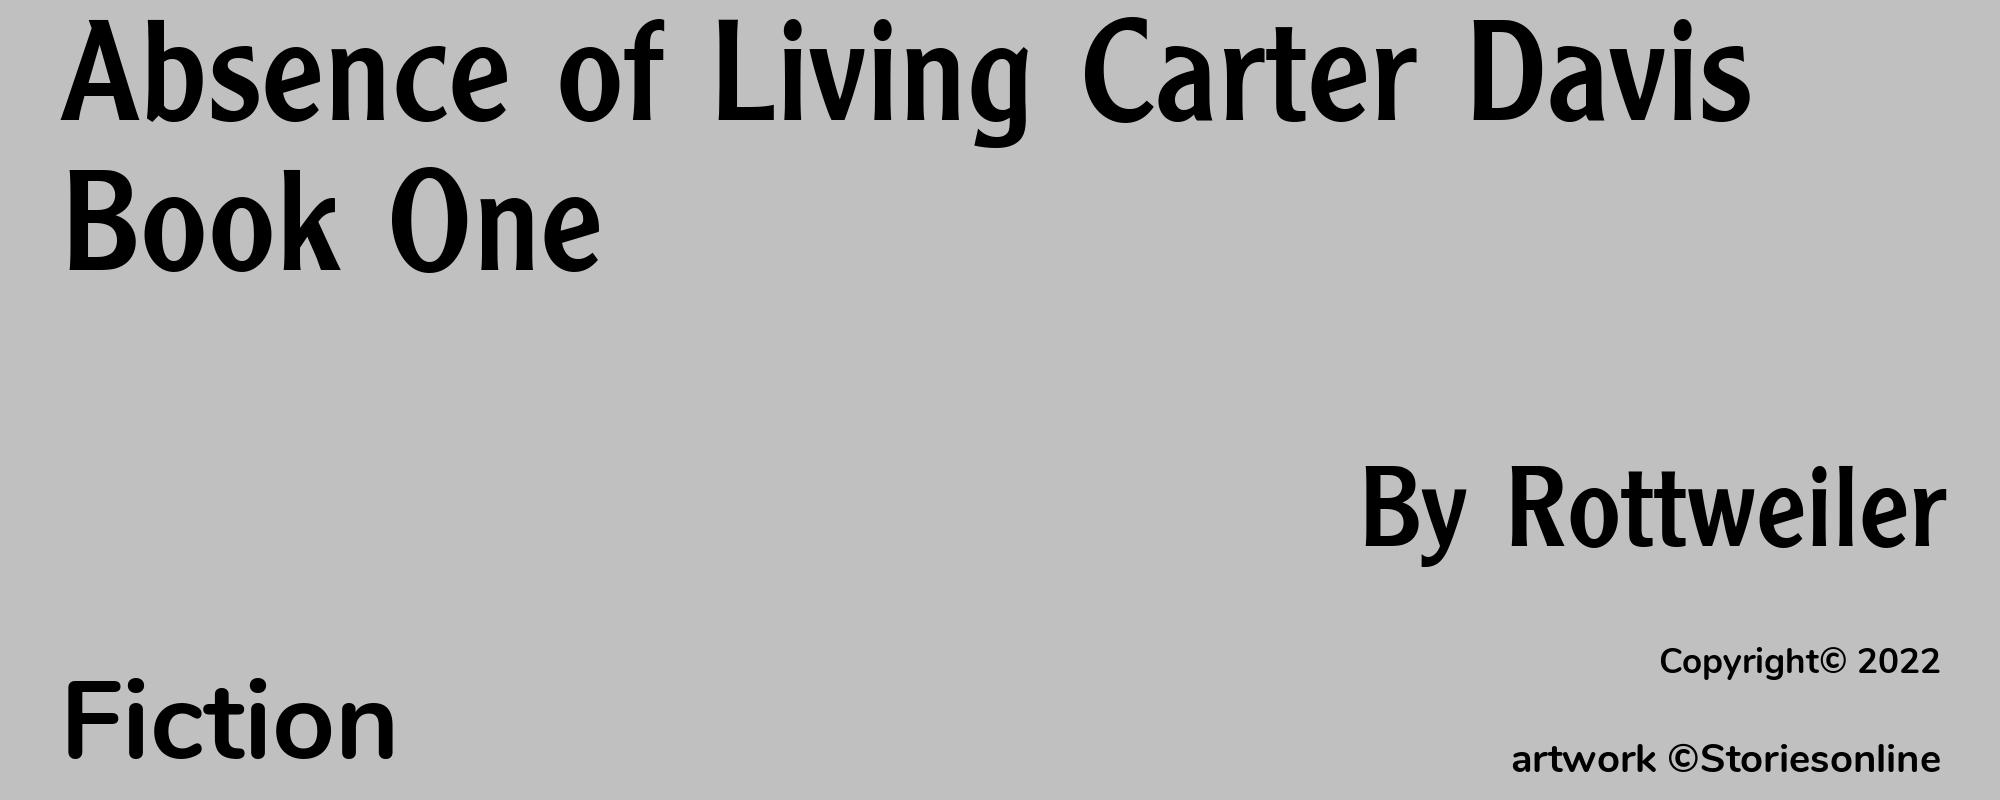 Absence of Living Carter Davis Book One - Cover